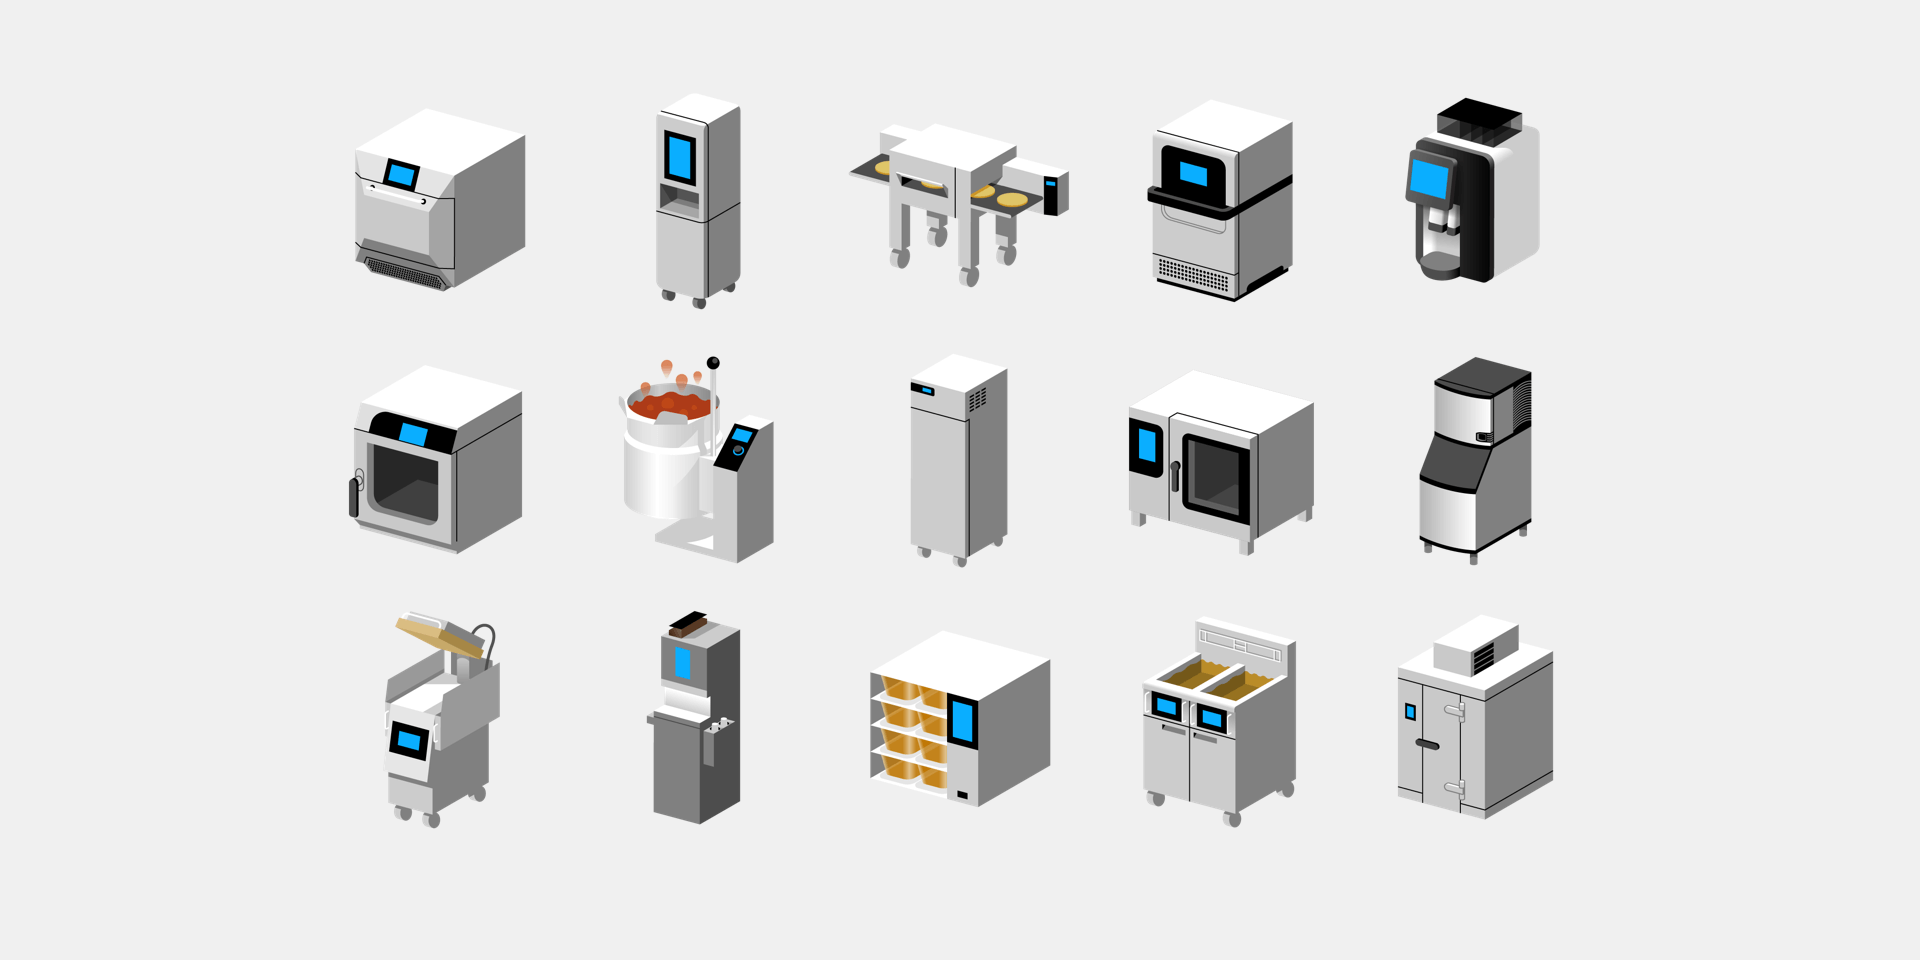 Several illustrations of individual kitchen devices show the applicability of the Welbilt KitchenConnect Application to many different appliances or families of appliances.